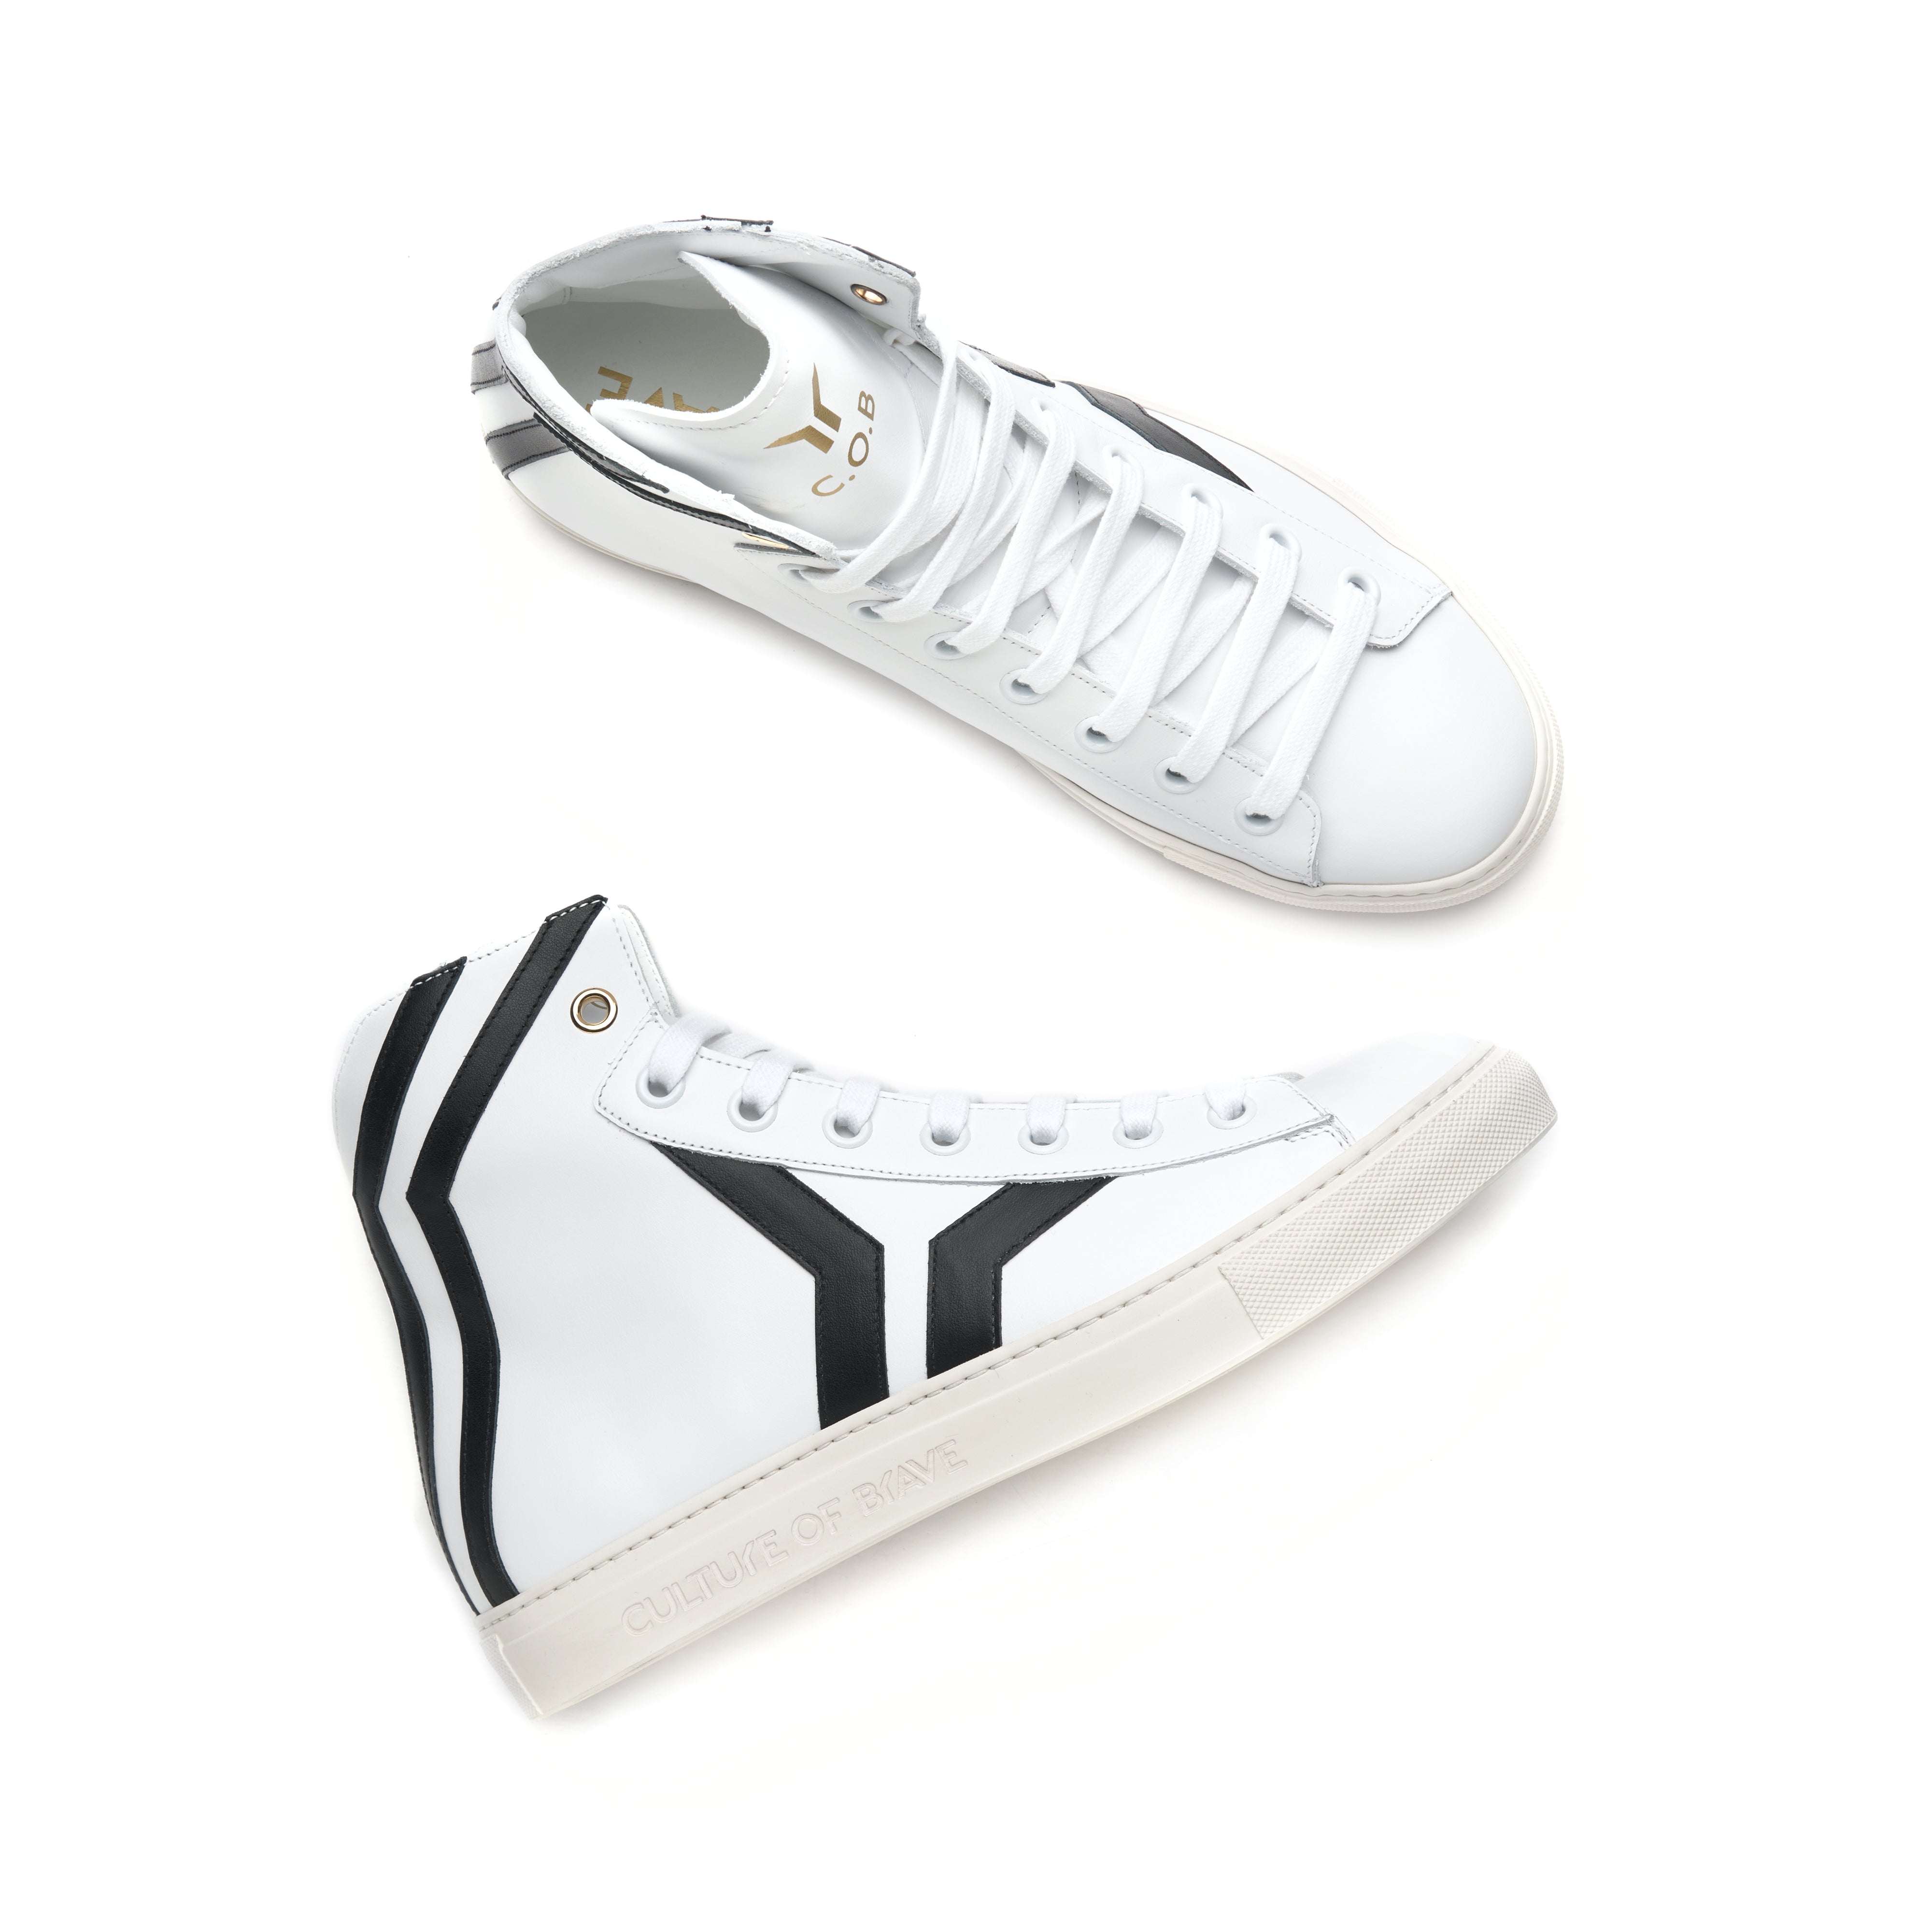 Resilient S15 Men White leather black wing mid cut